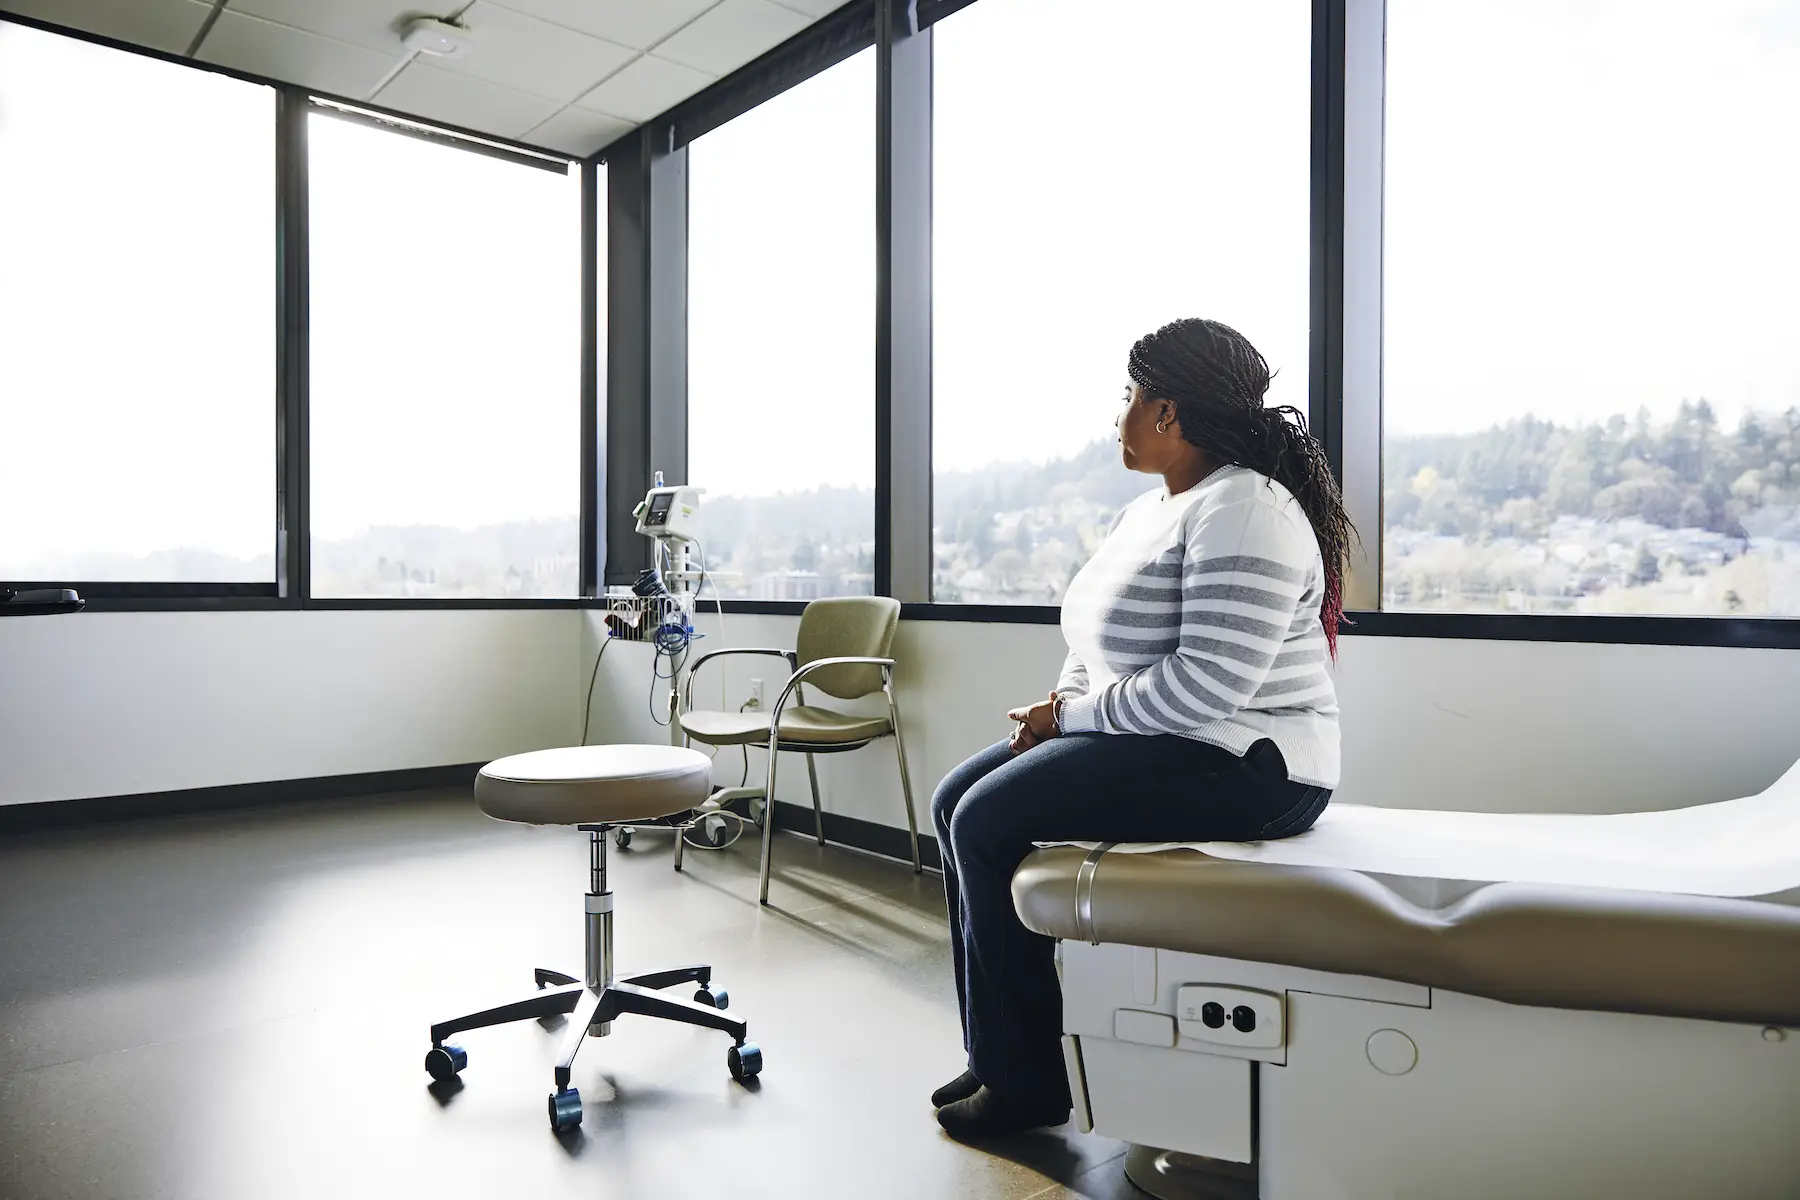 A female patient sits on the edge of an exam table in an empty doctor's office with windows overlooking a forest